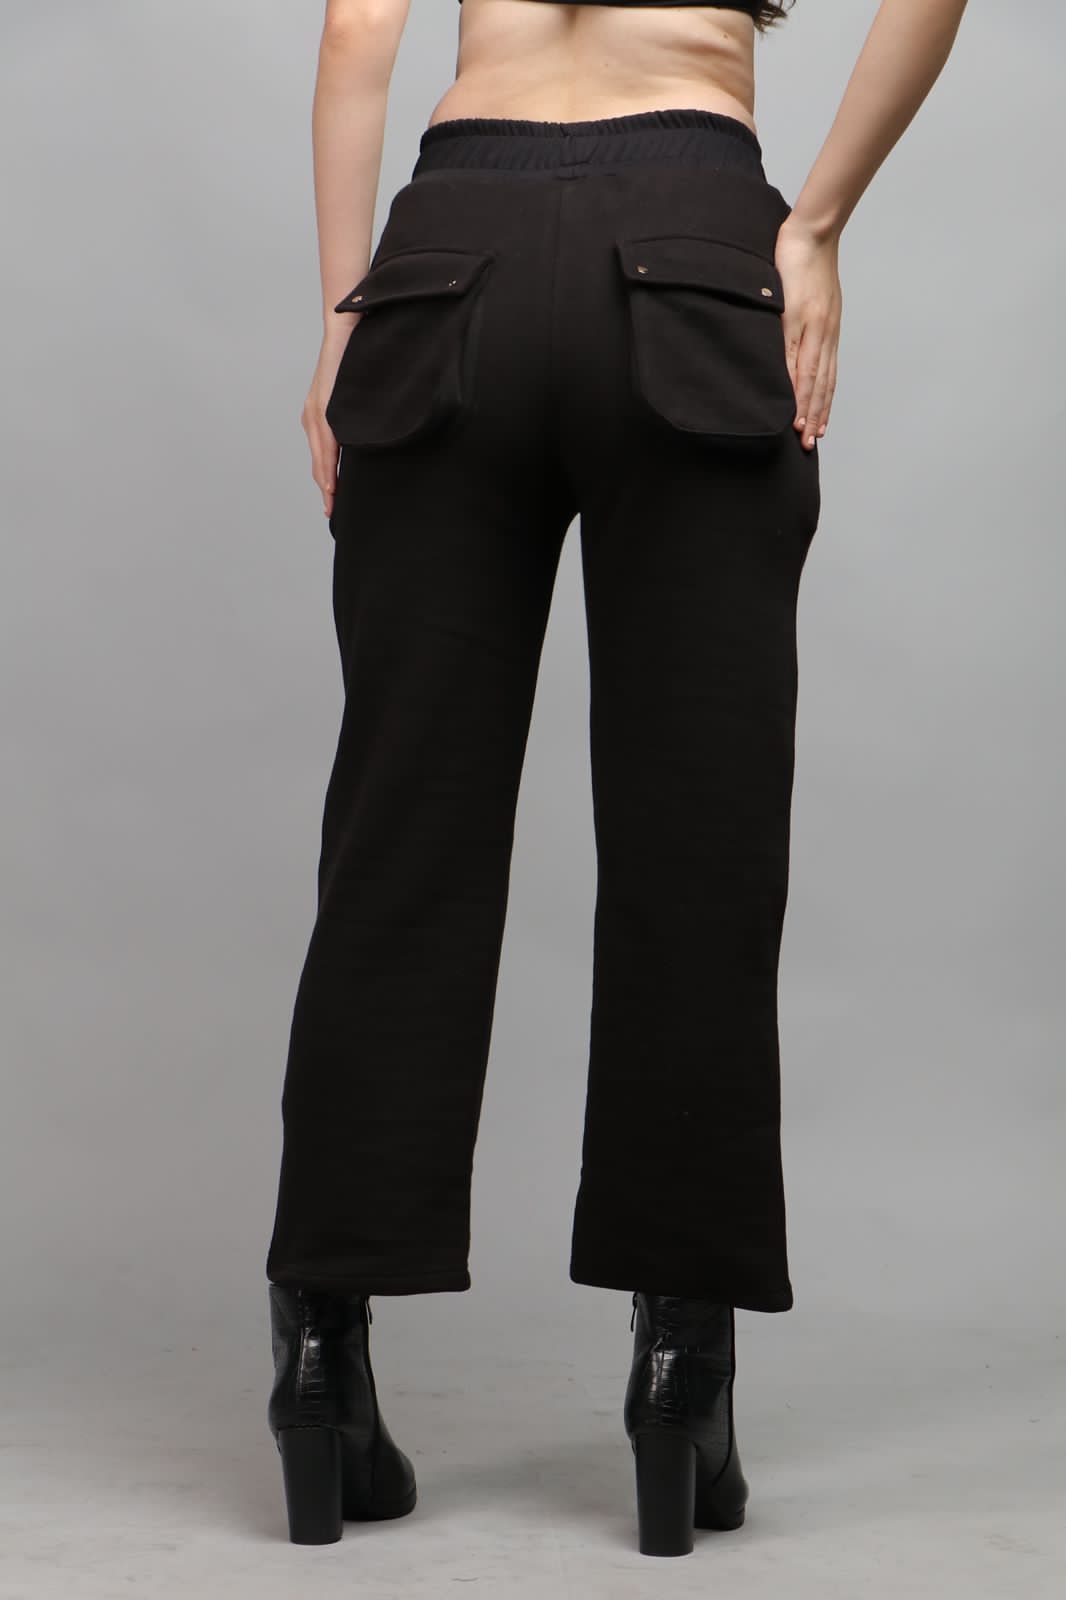 Miami Florida Trackpant - Embrace Comfort and Style!